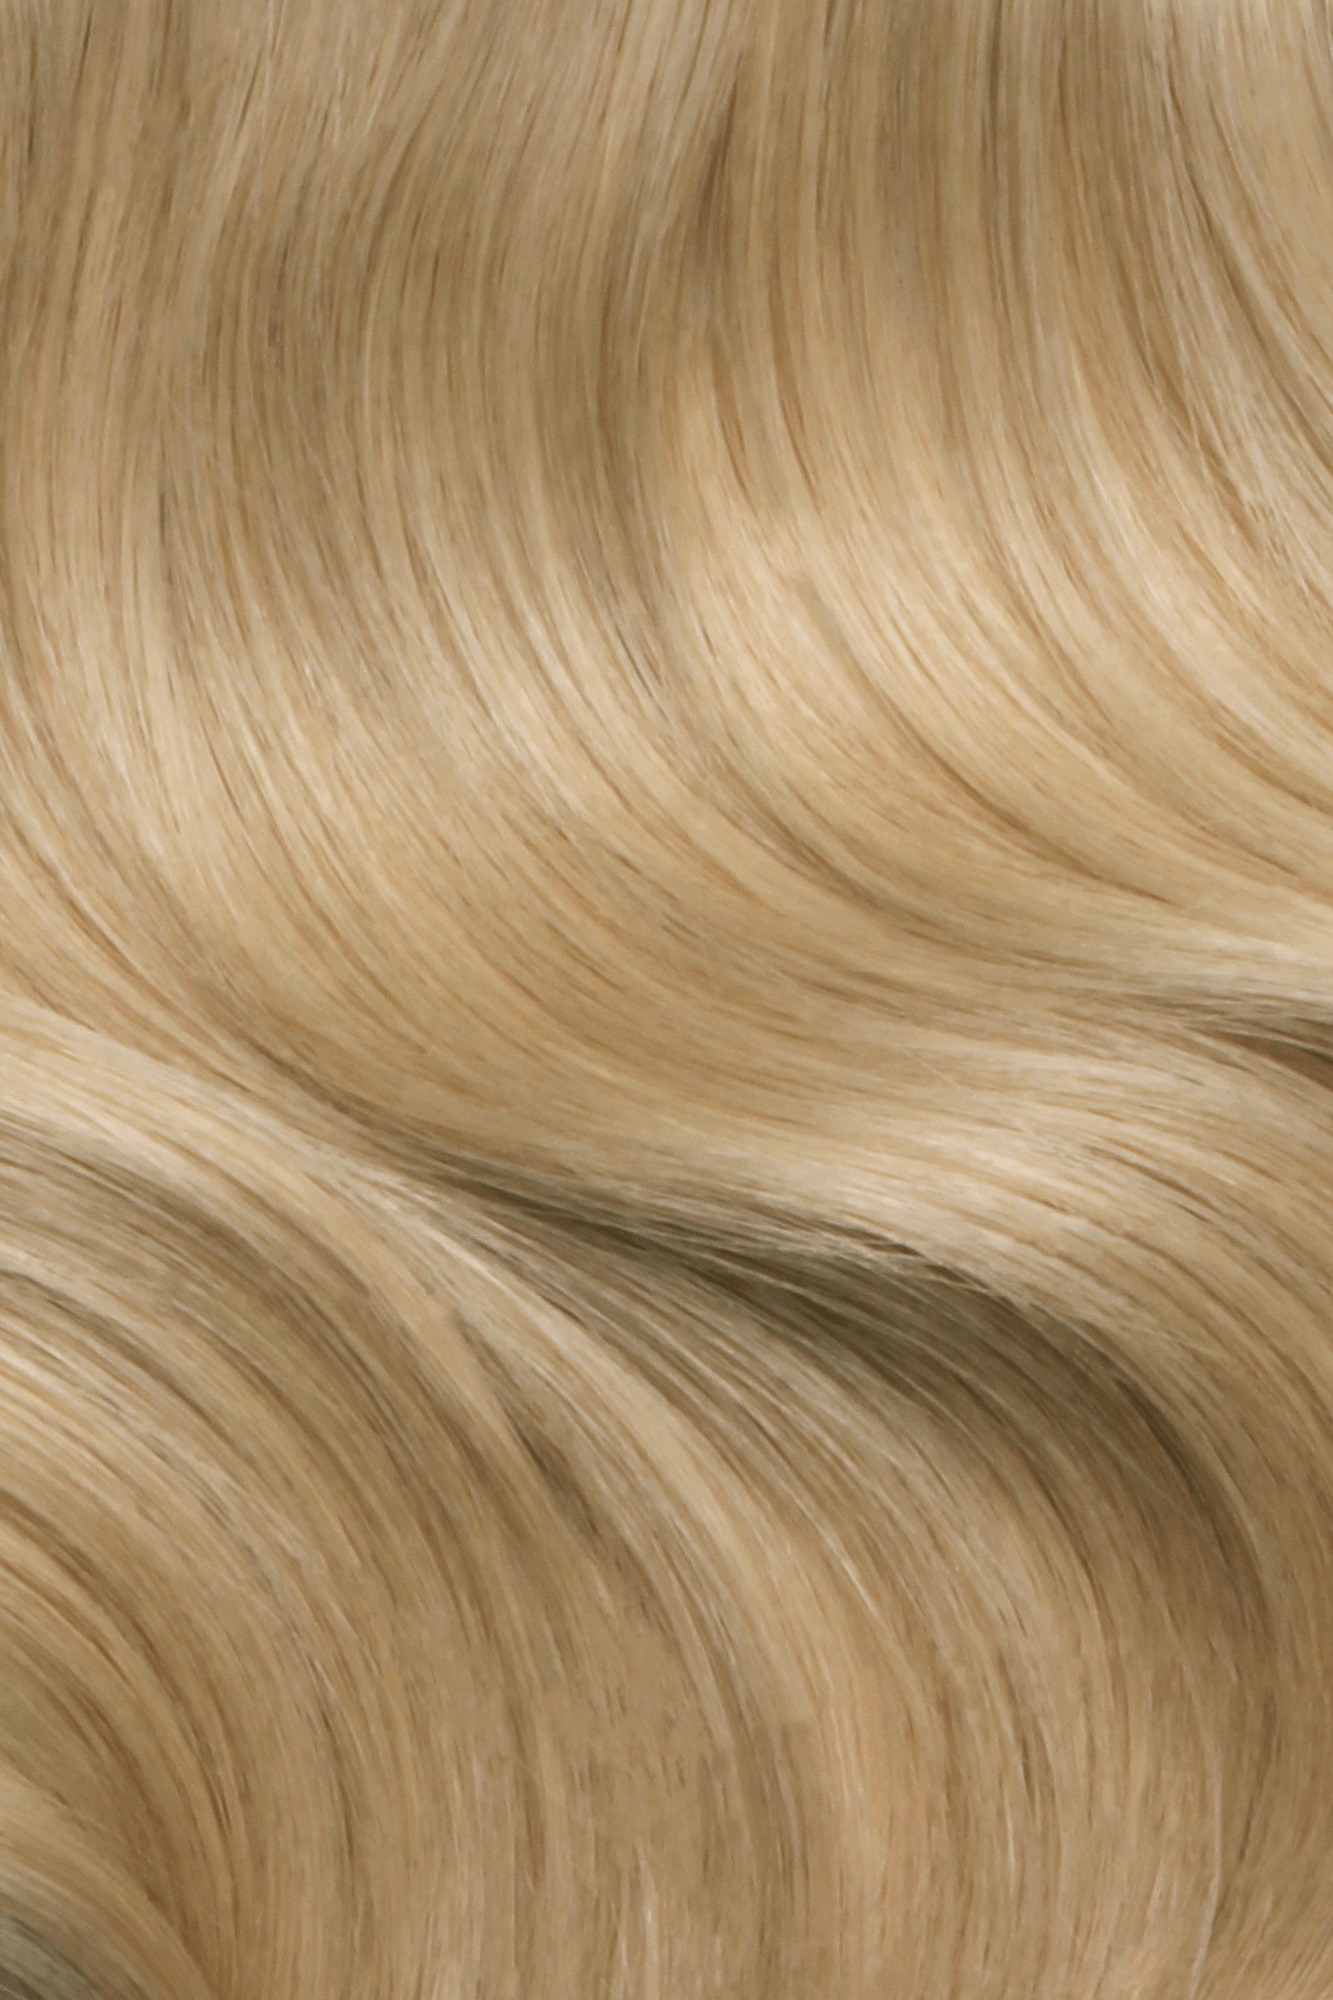 SEAMLESS® Tapes 22 Inches - SWAY Hair Extensions Beach-Ash-Blonde-9-613 SWAY SEAMLESS® Tapes 22 Inches - Natural, lightweight hair extensions for longer, fuller, and luxurious hair. Virtually undetectable, reusable, and perfect for any hairstyle